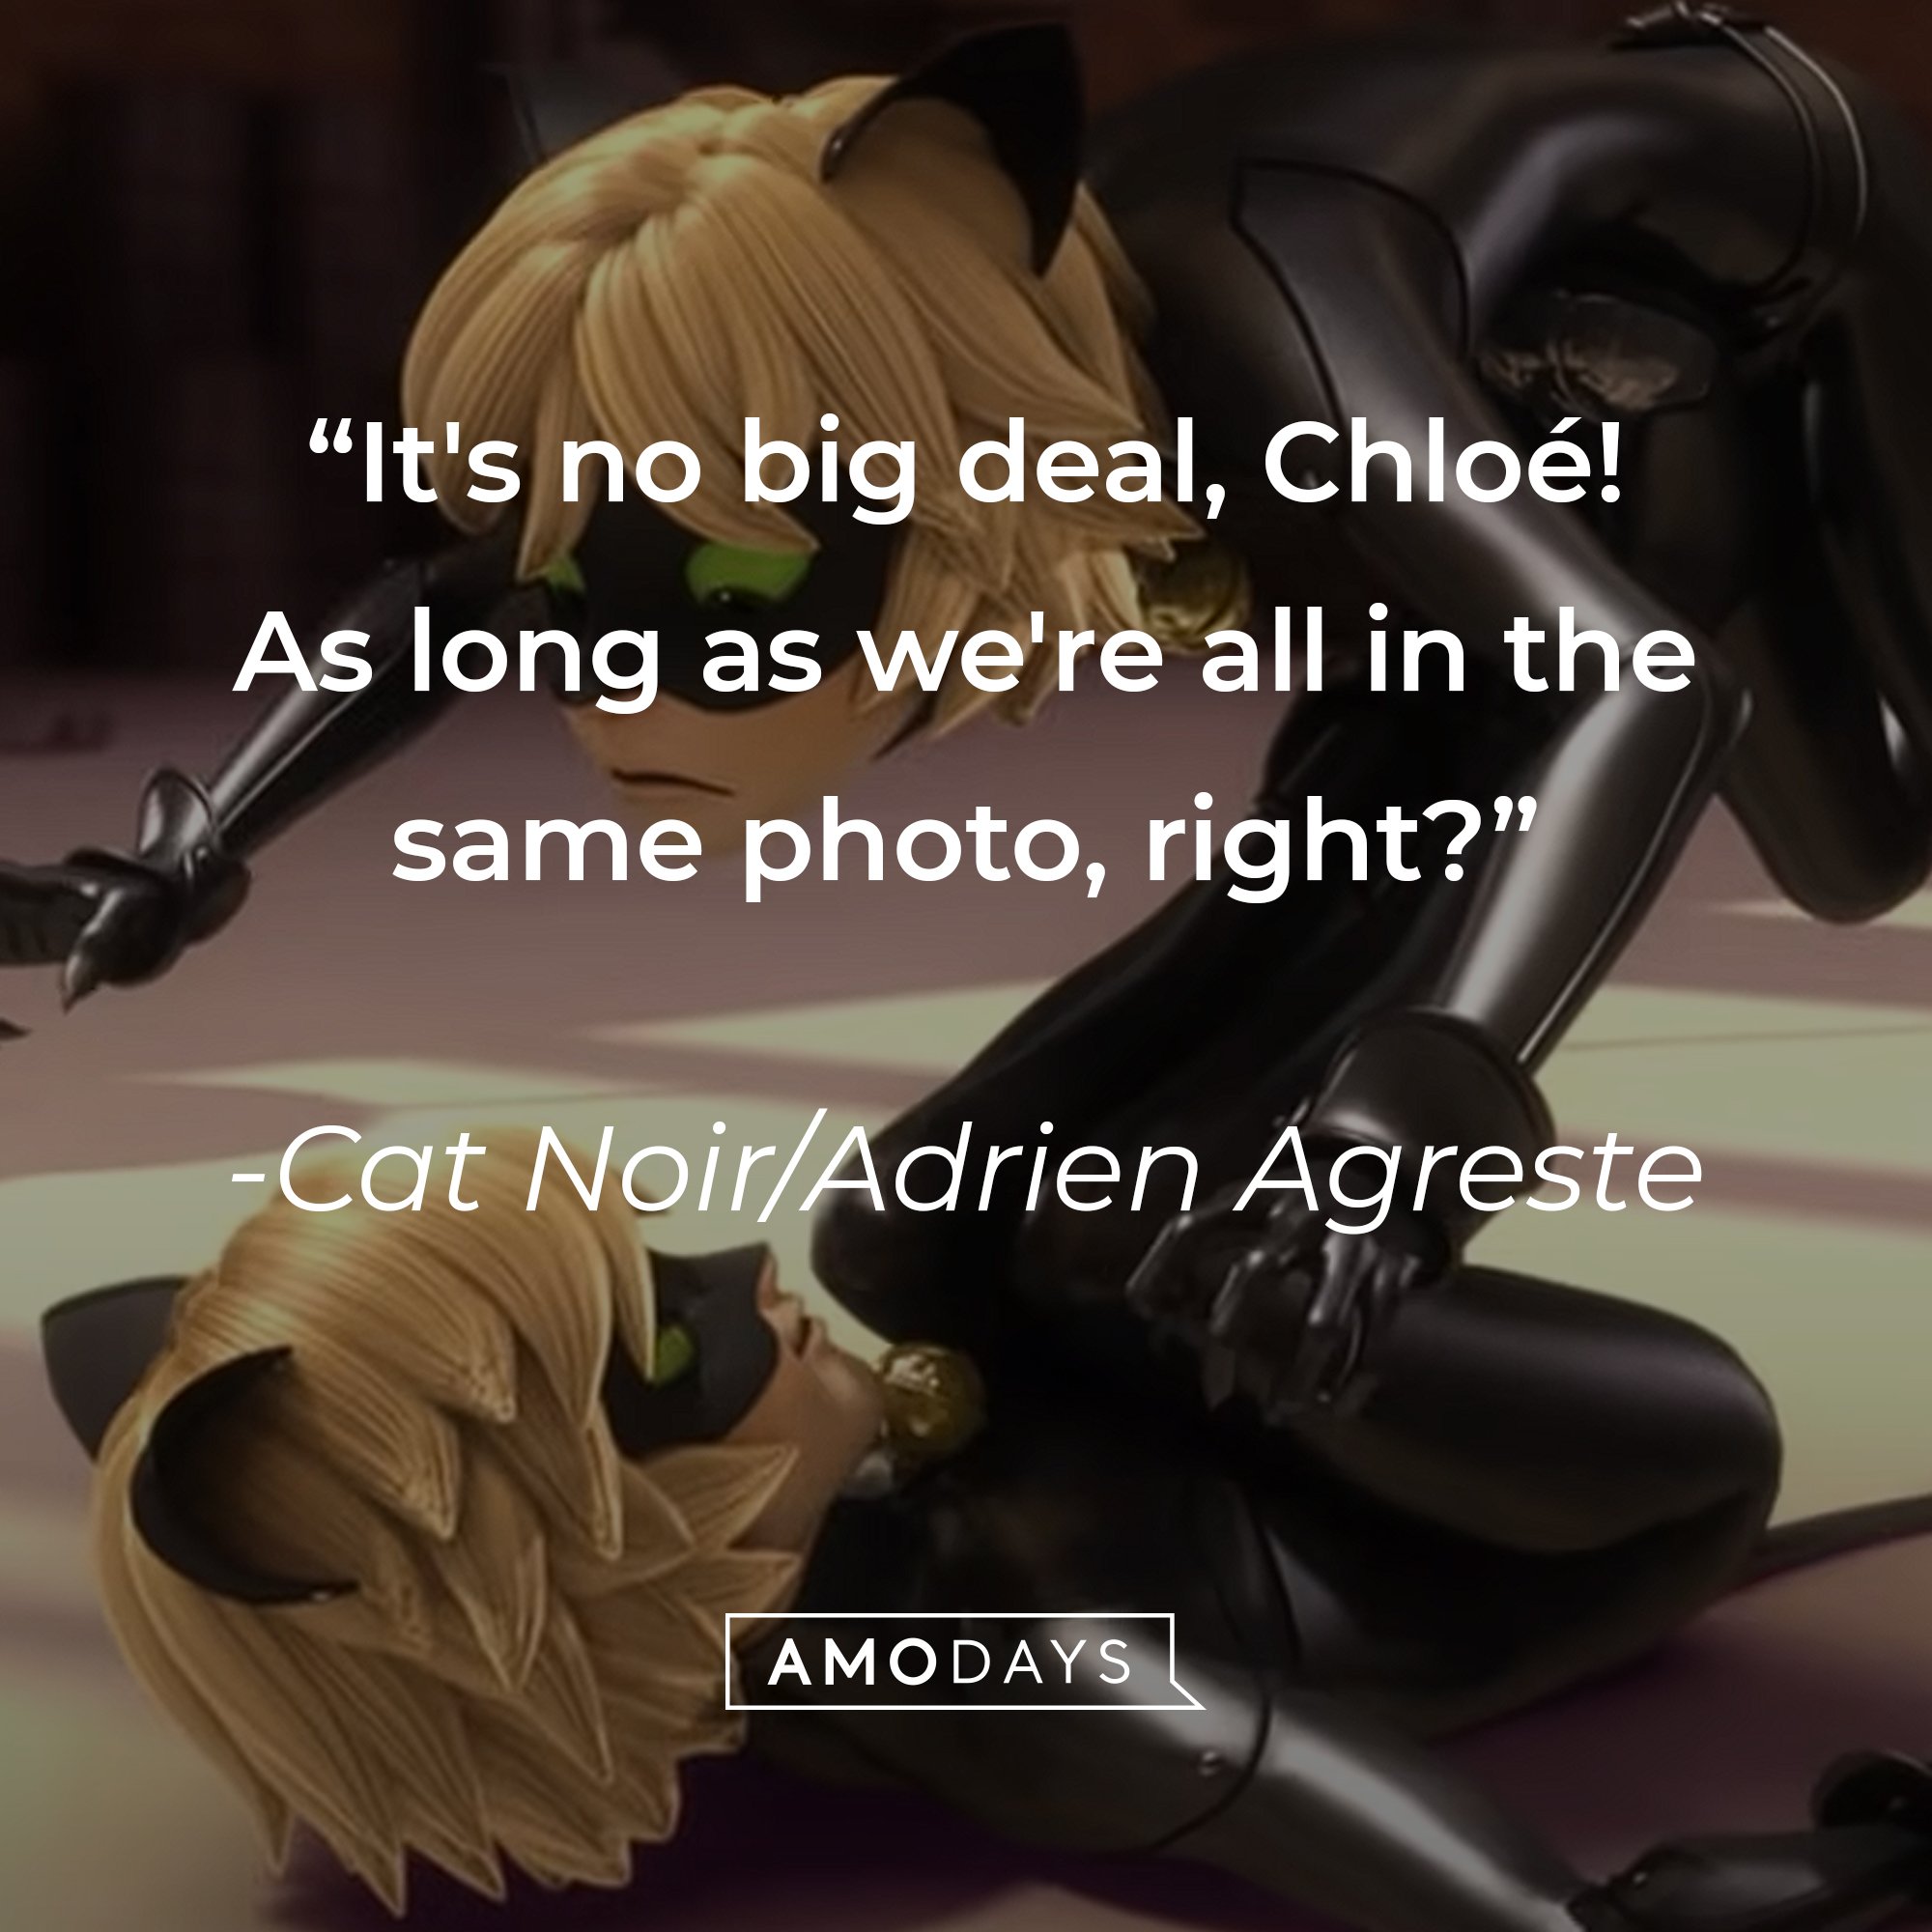 Cat Noir/Adrien Agreste’s quote: "It's no big deal, Chloé! As long as we're all in the same photo, right?” | Image: AmoDays 